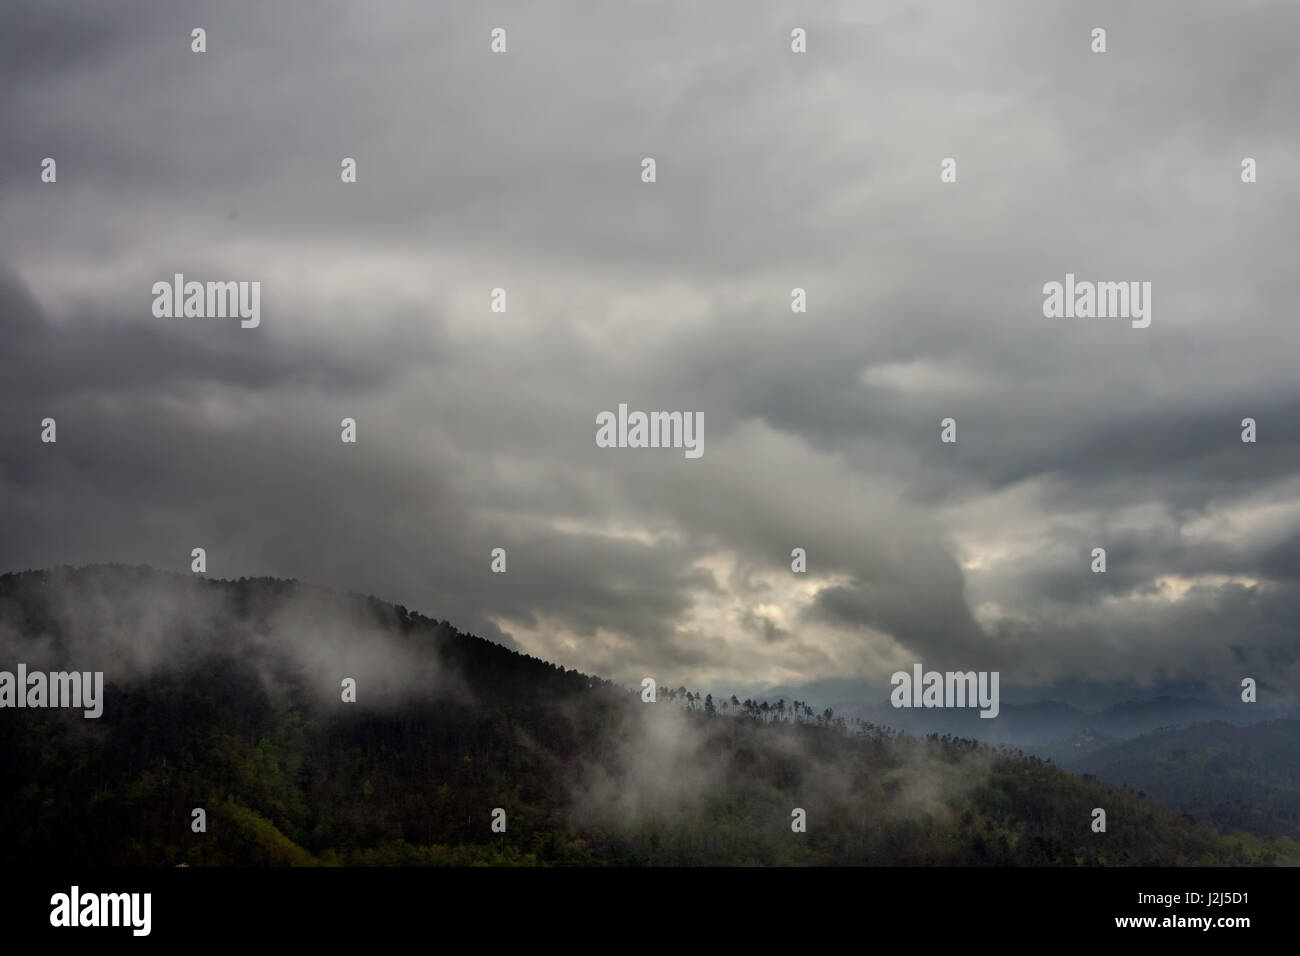 Bad weather coming in over hills. Lunigiana, Italy. Stock Photo